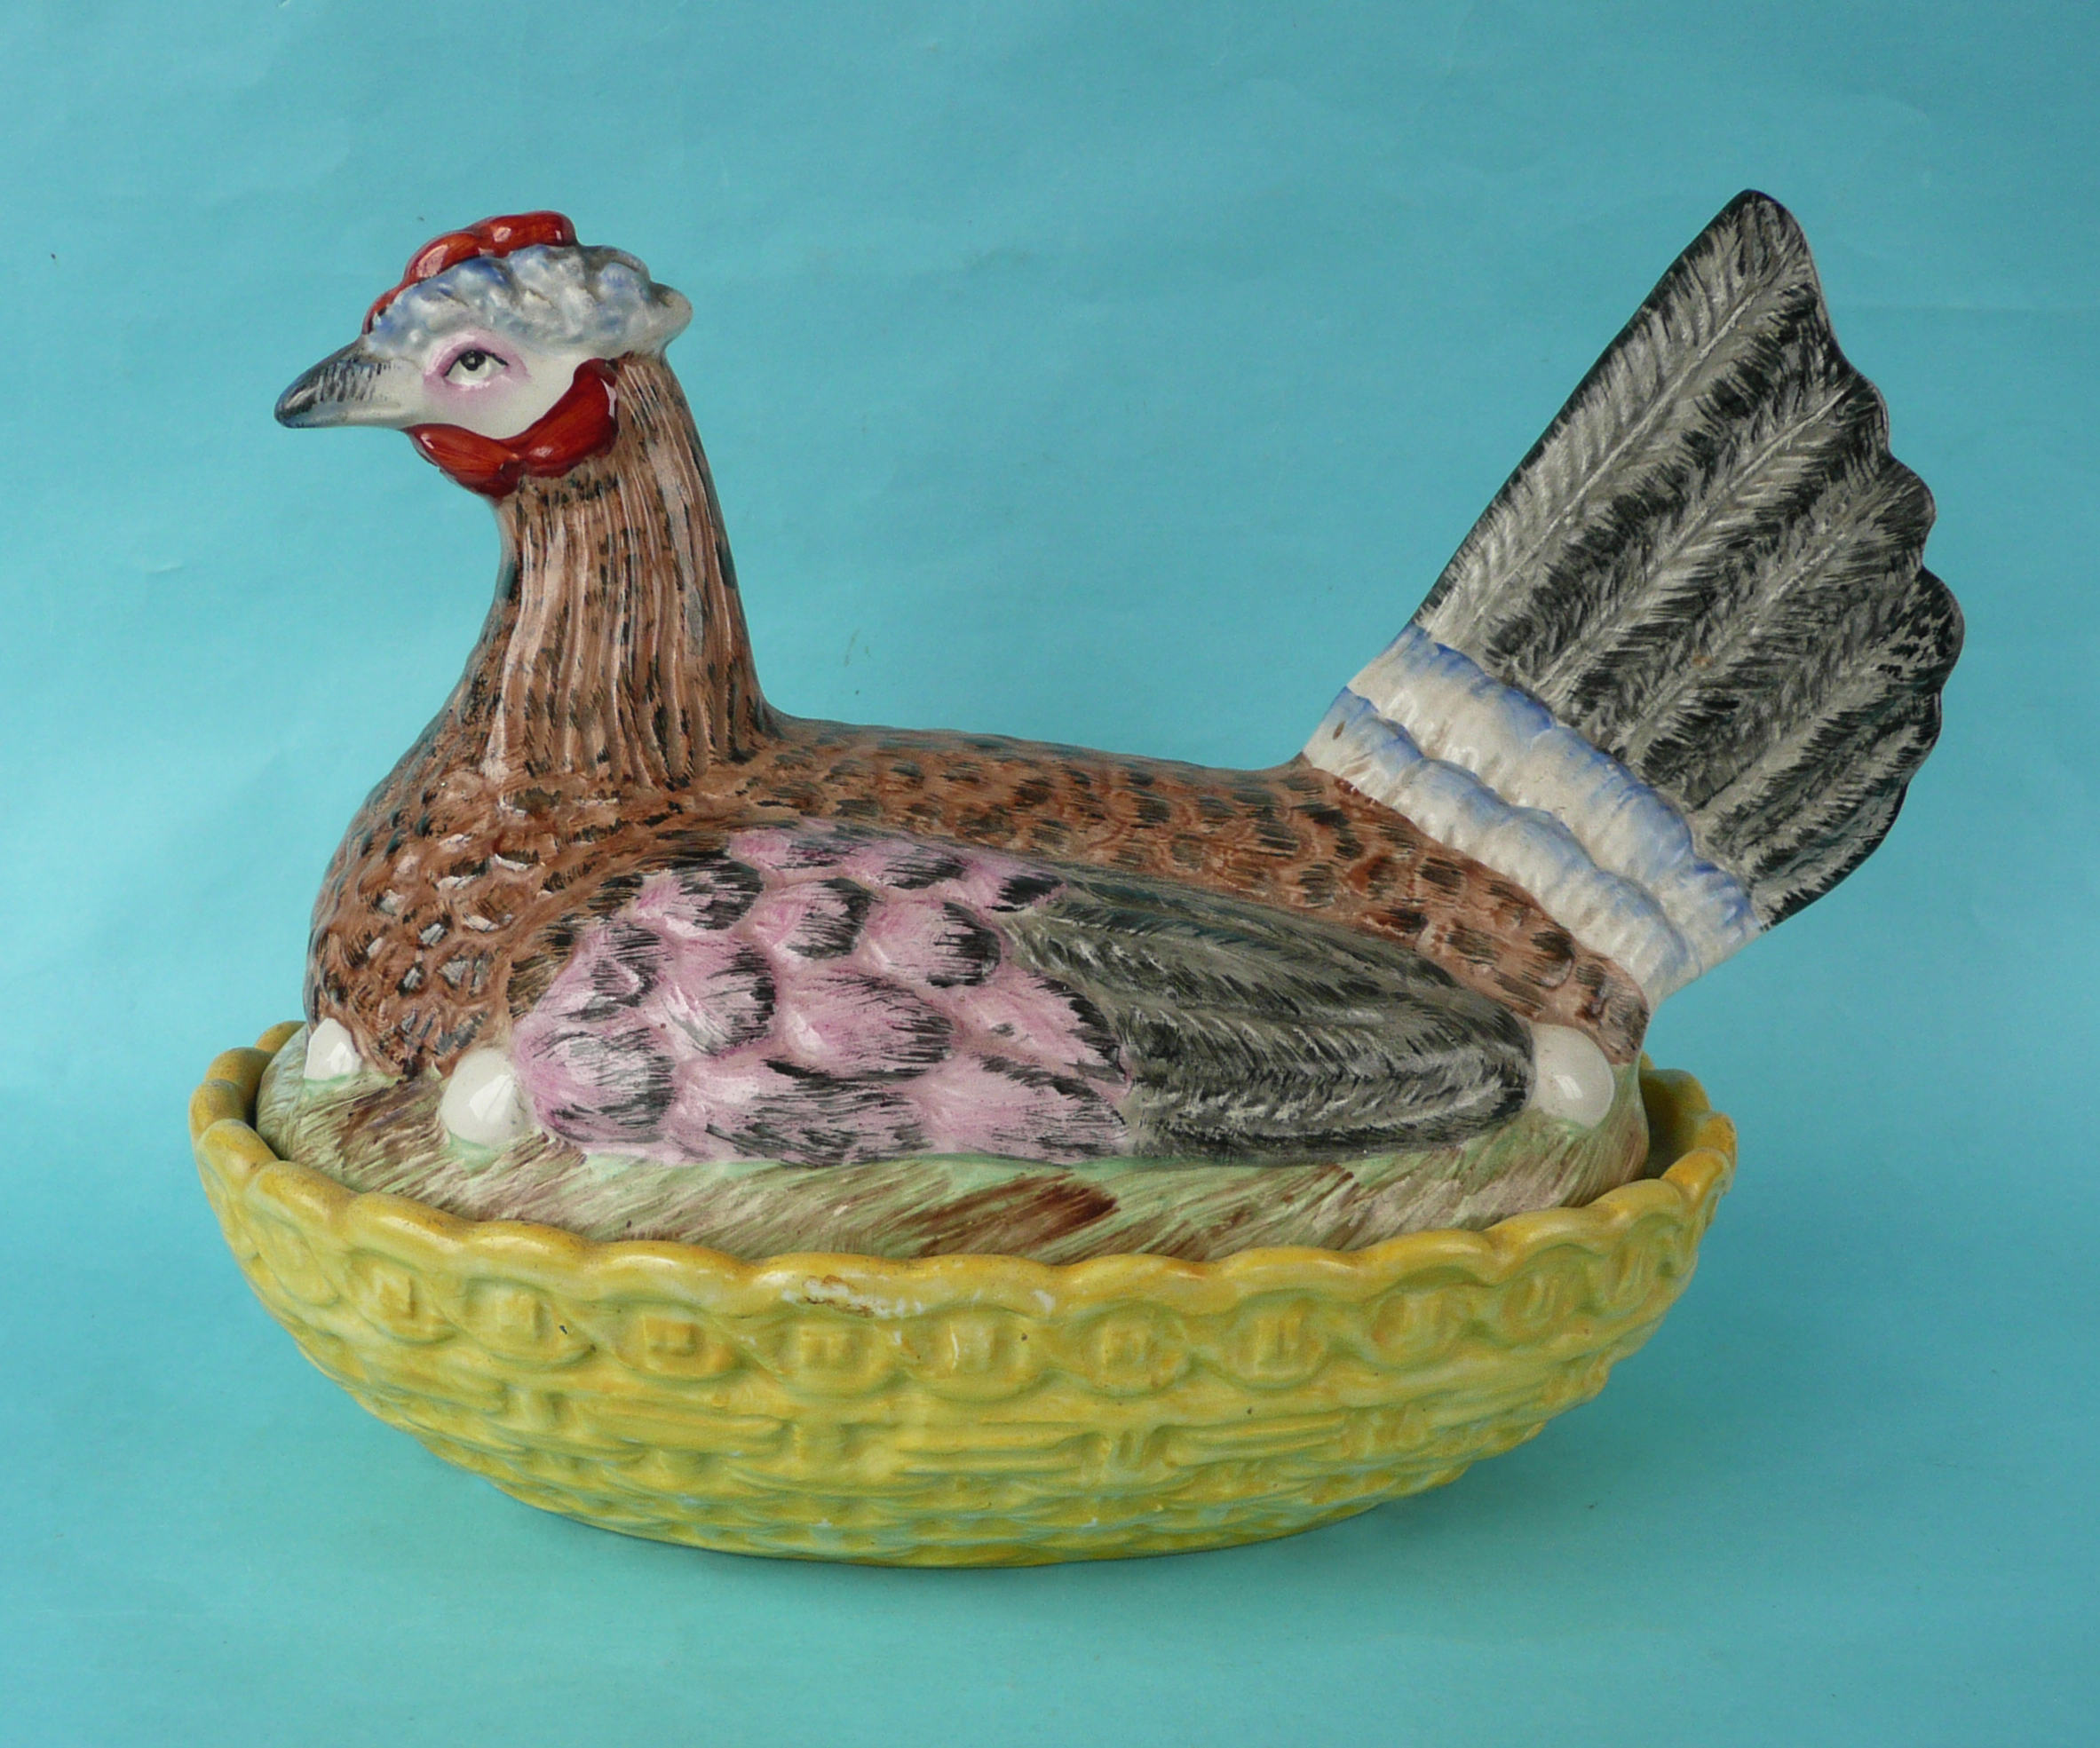 A good and colourful Staffordshire pottery tureen and cover modelled as a hen on a basket